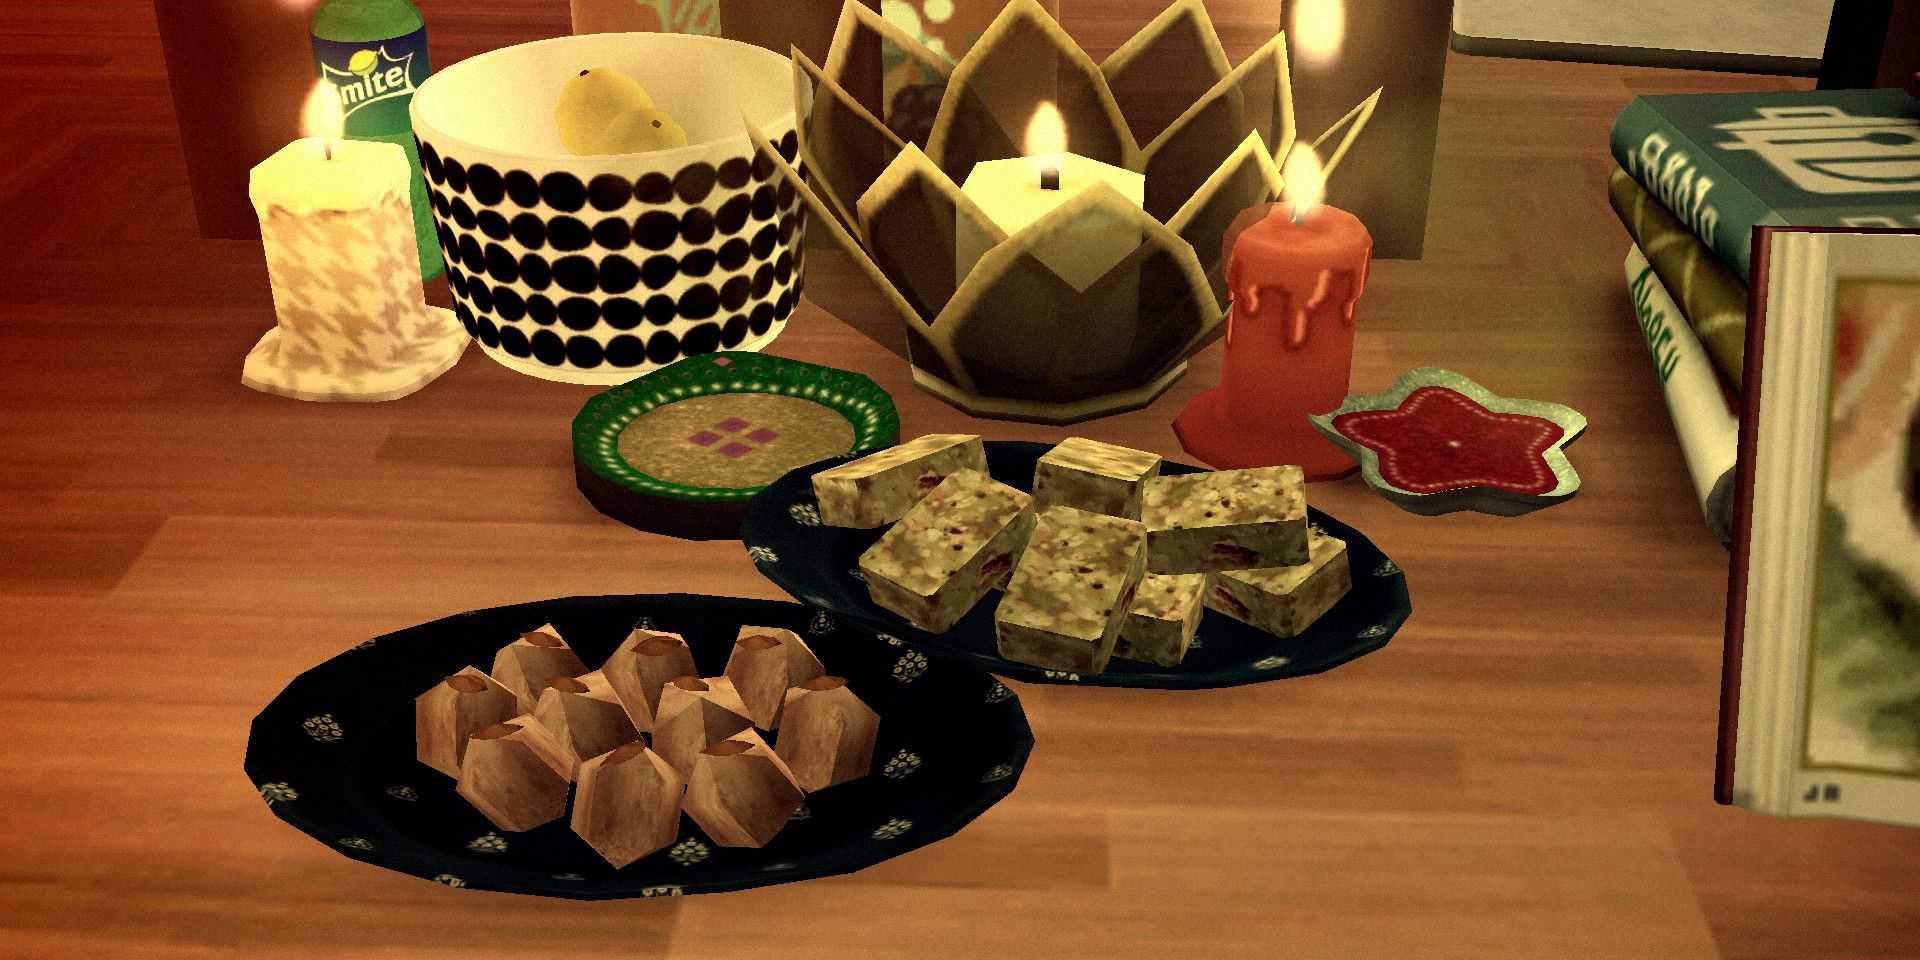 A collection of Diwali sweets sitting on top of a table in The Sims 4 alongside some colorful candles.